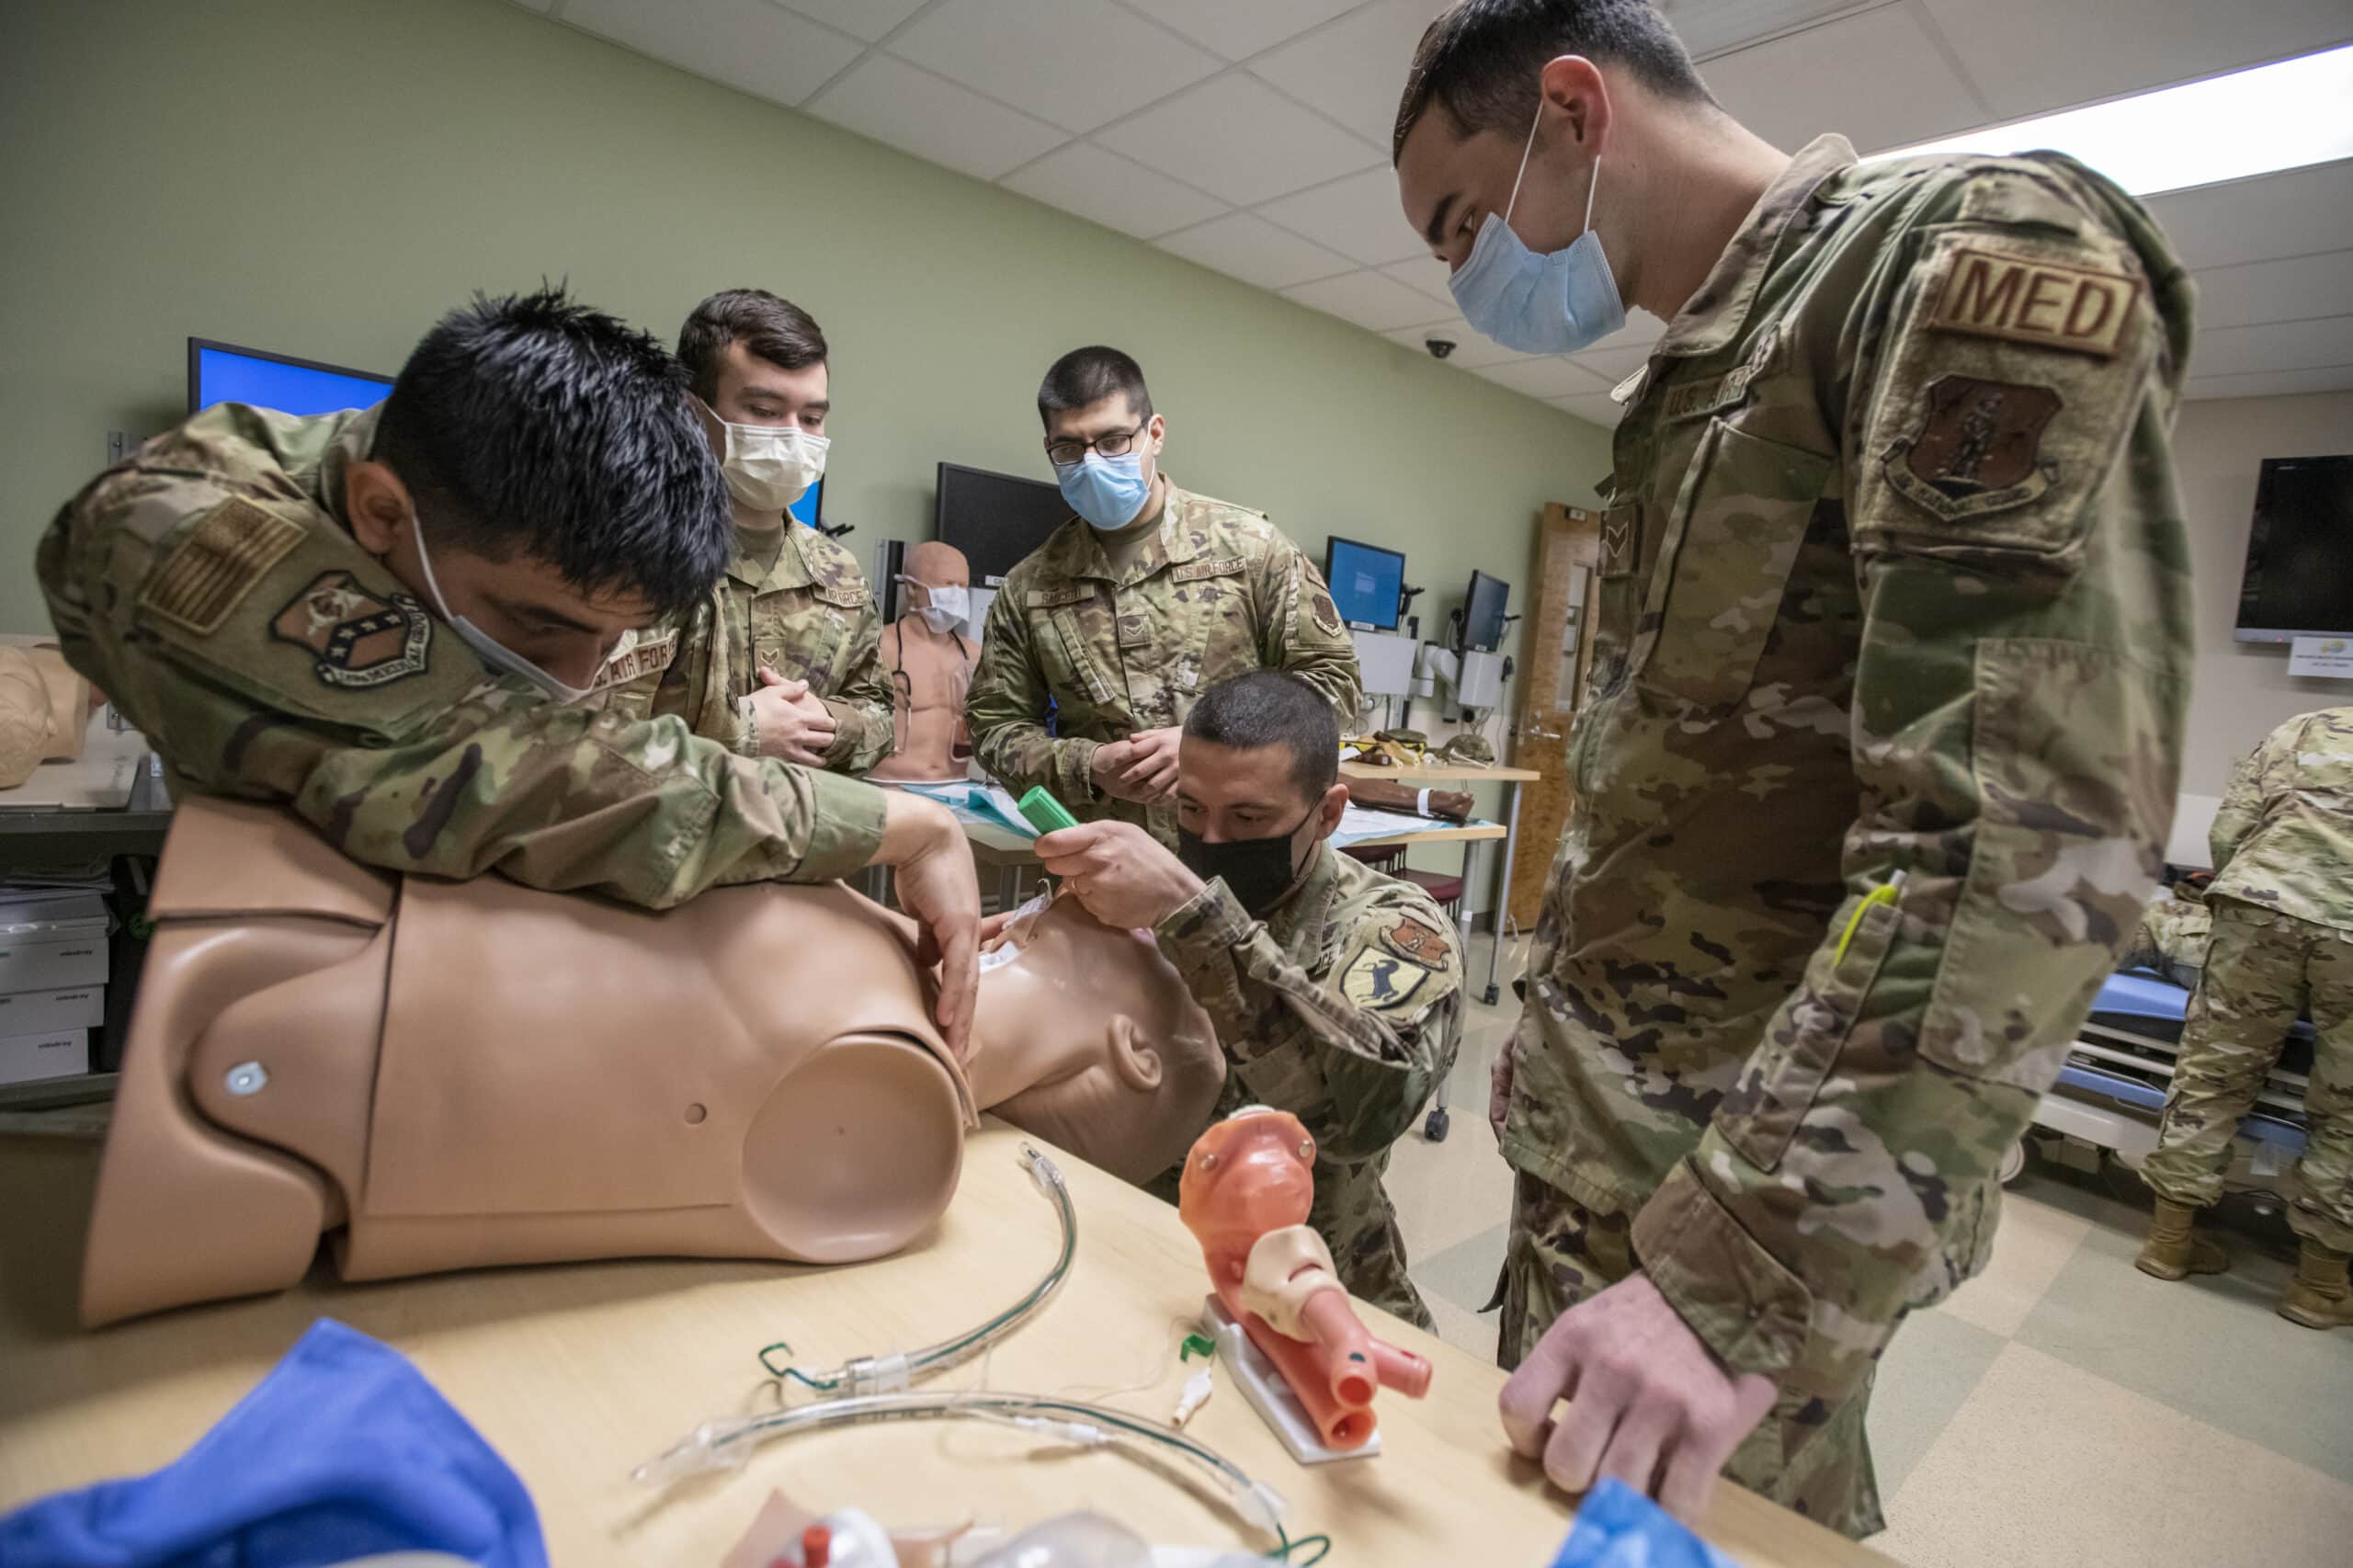 Members of the 189th Medical Group train in trauma care with manikin in the UAMS Simulation Center.